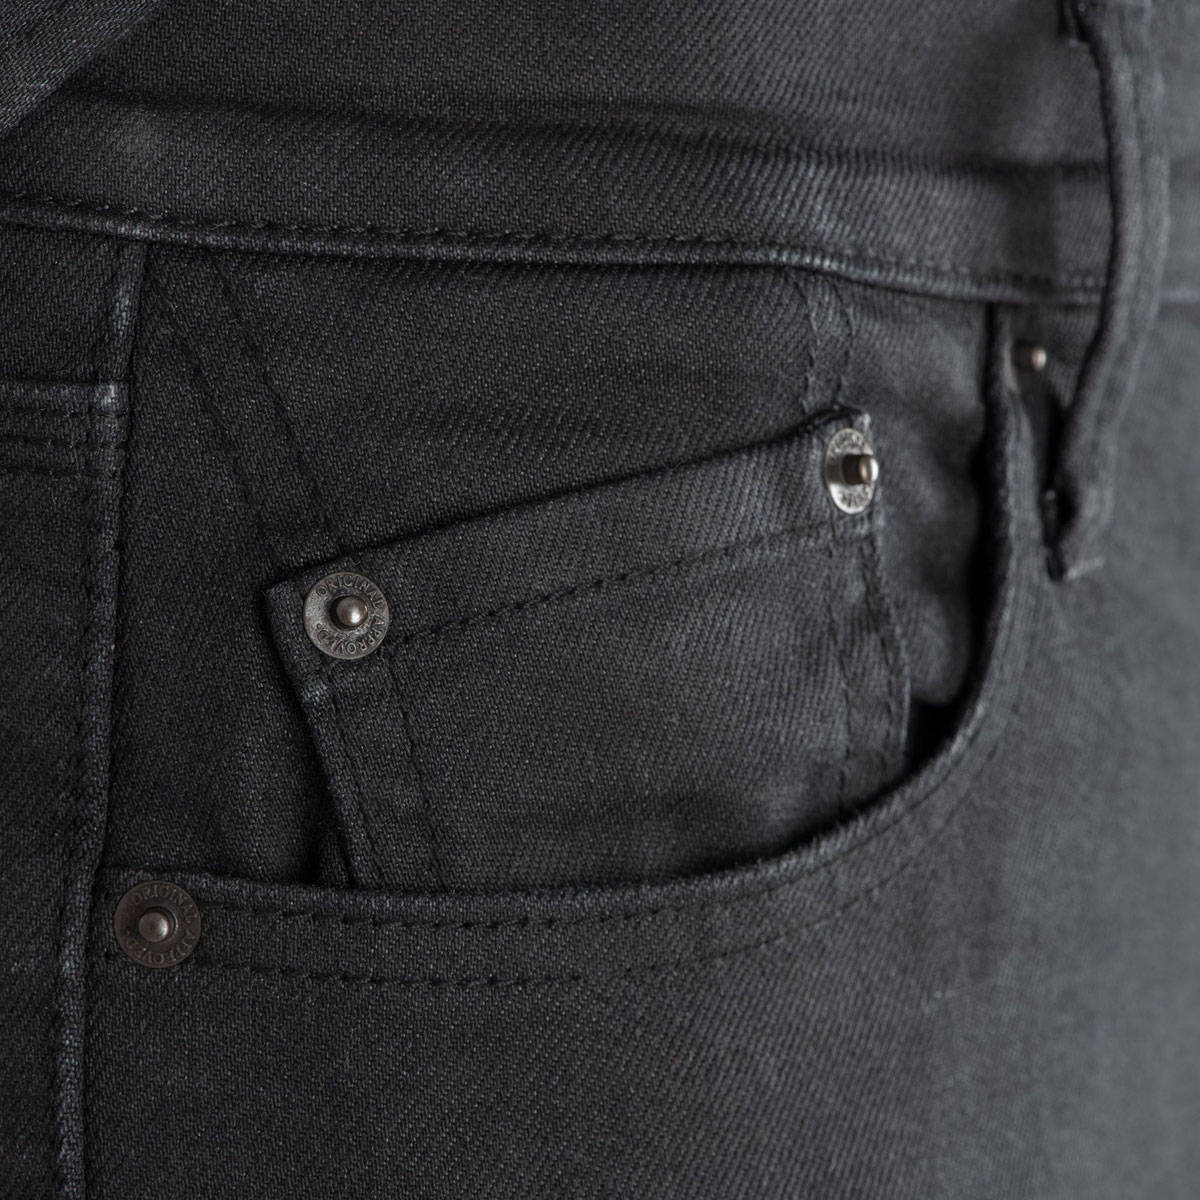 Oxford AAA Original Jeans in a straight fit: CE AAA rated single-layer motorcycle jeans - coin pocket